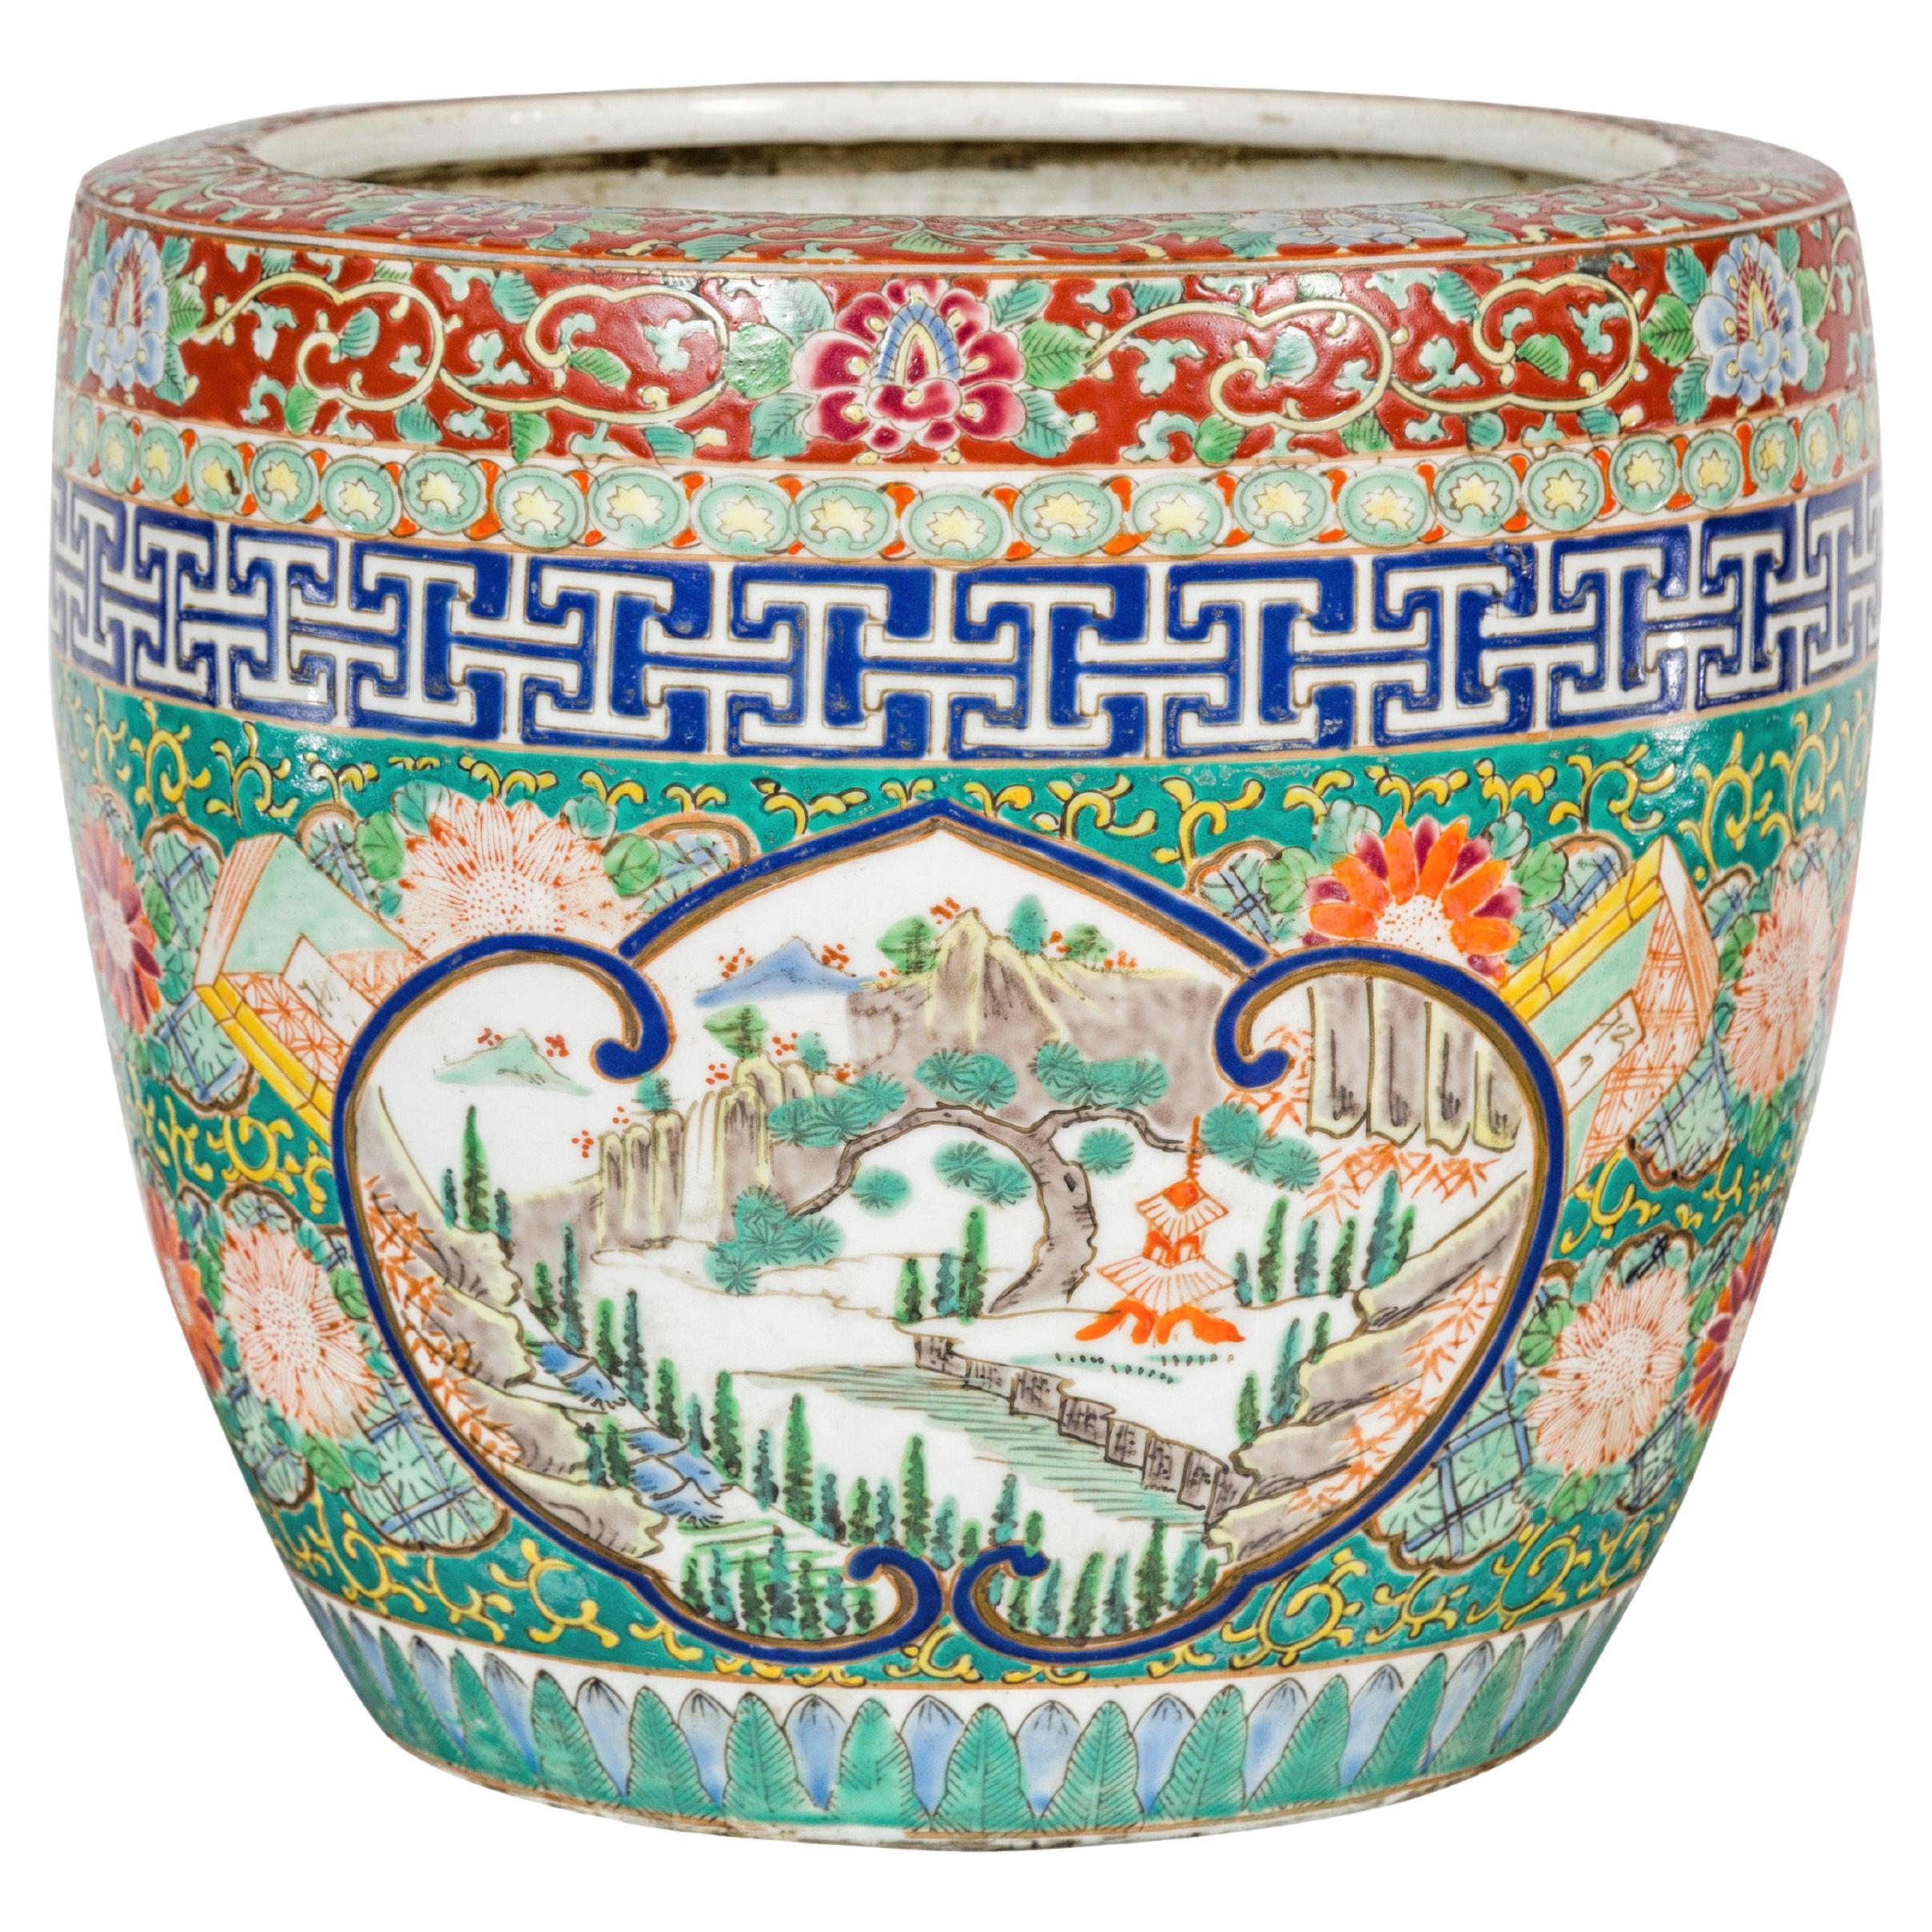 Japanese Hand-Painted Imari Planter with Landscape, Tree, Flowers and Books For Sale